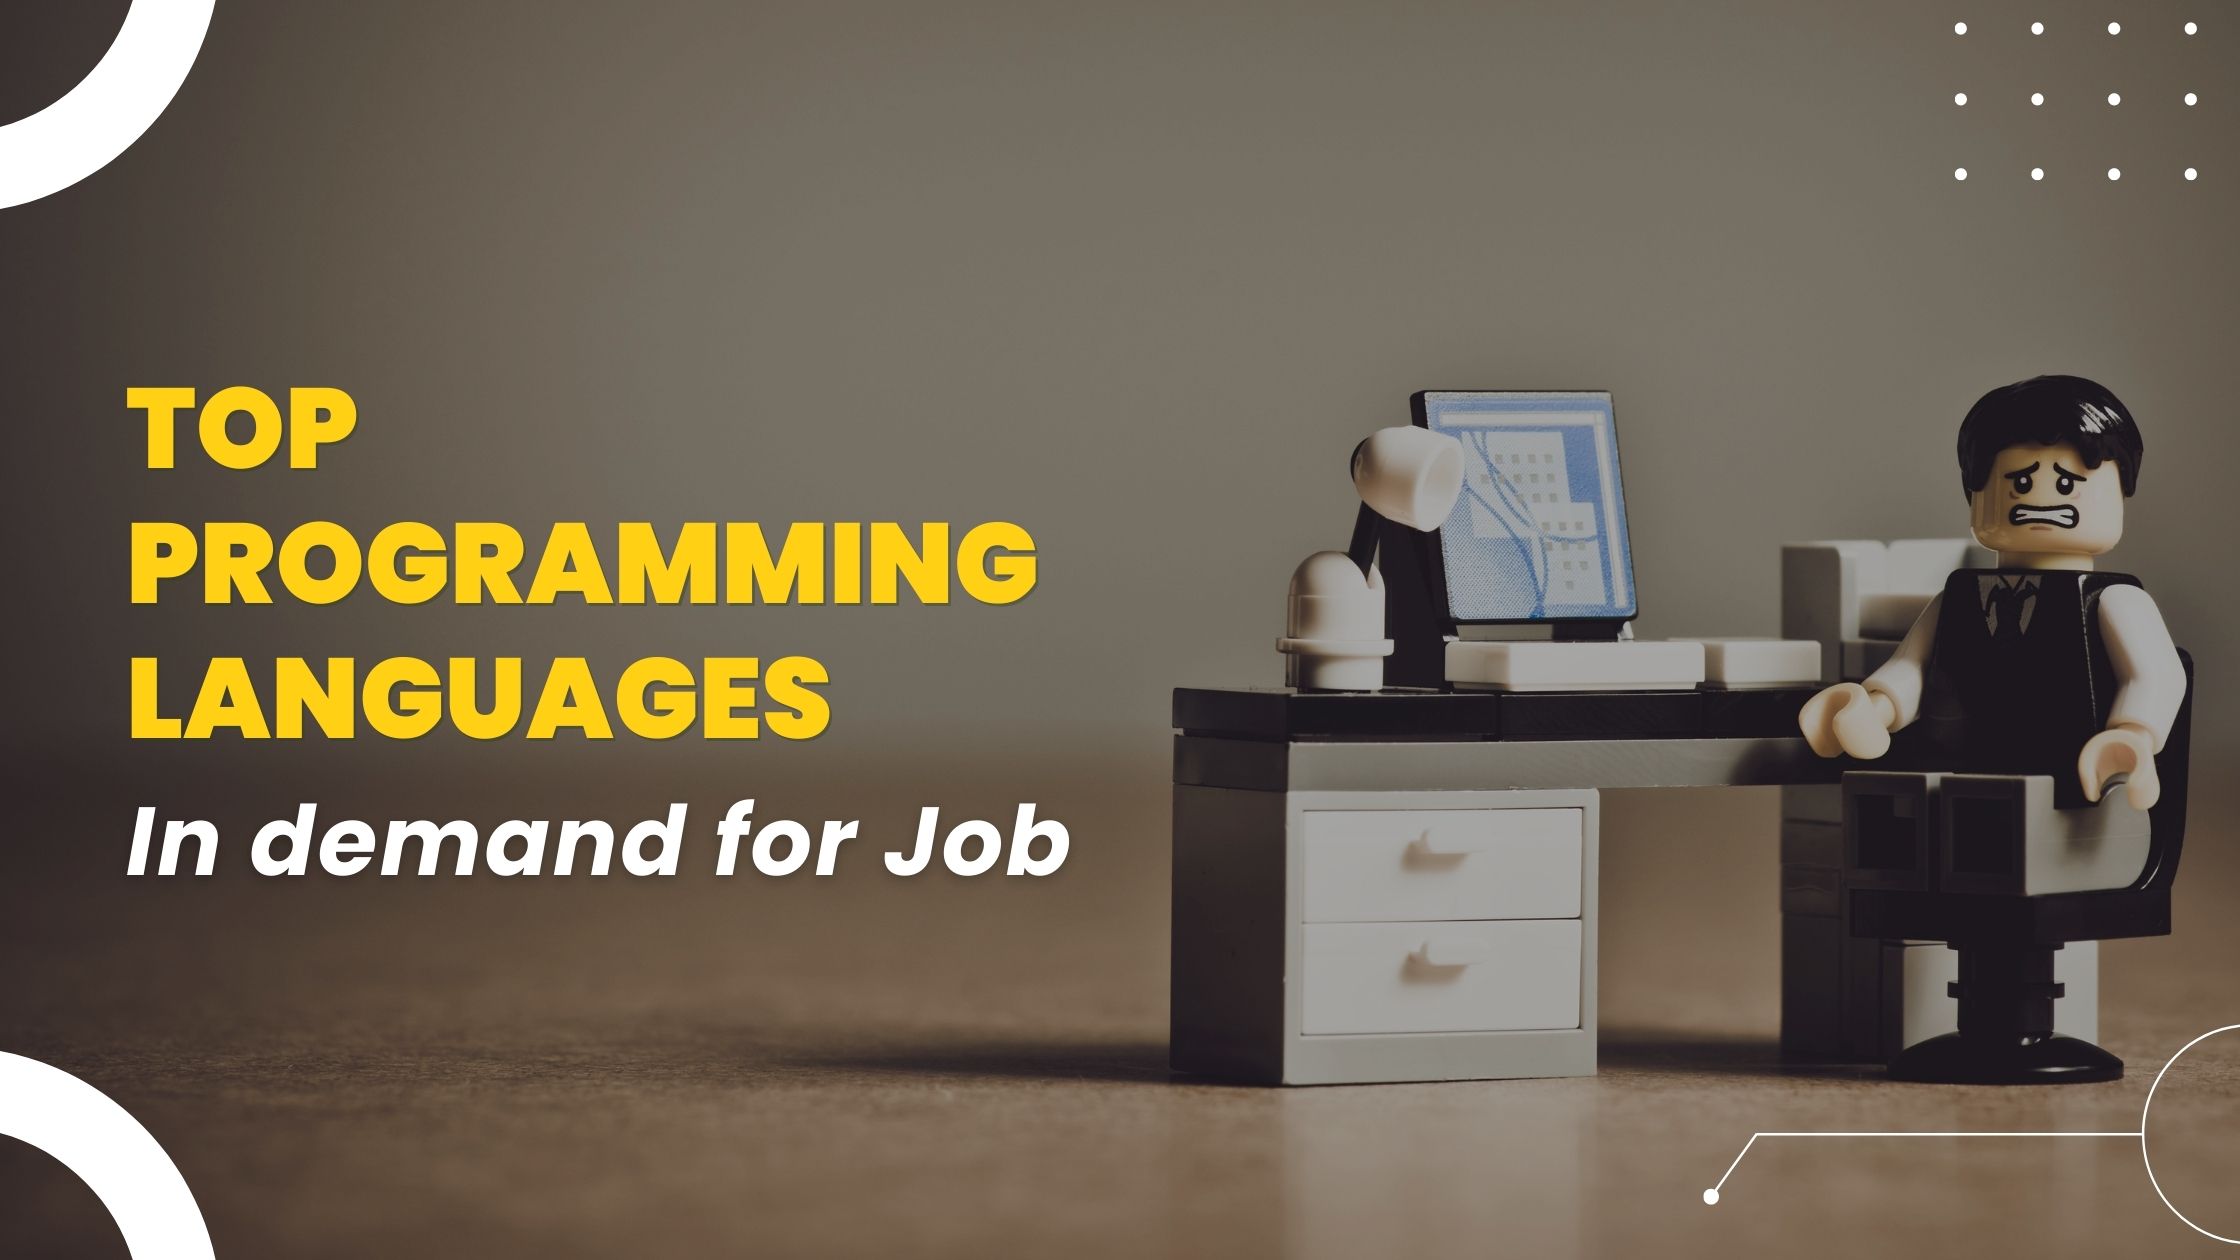 Top programming languages in demand for jobs